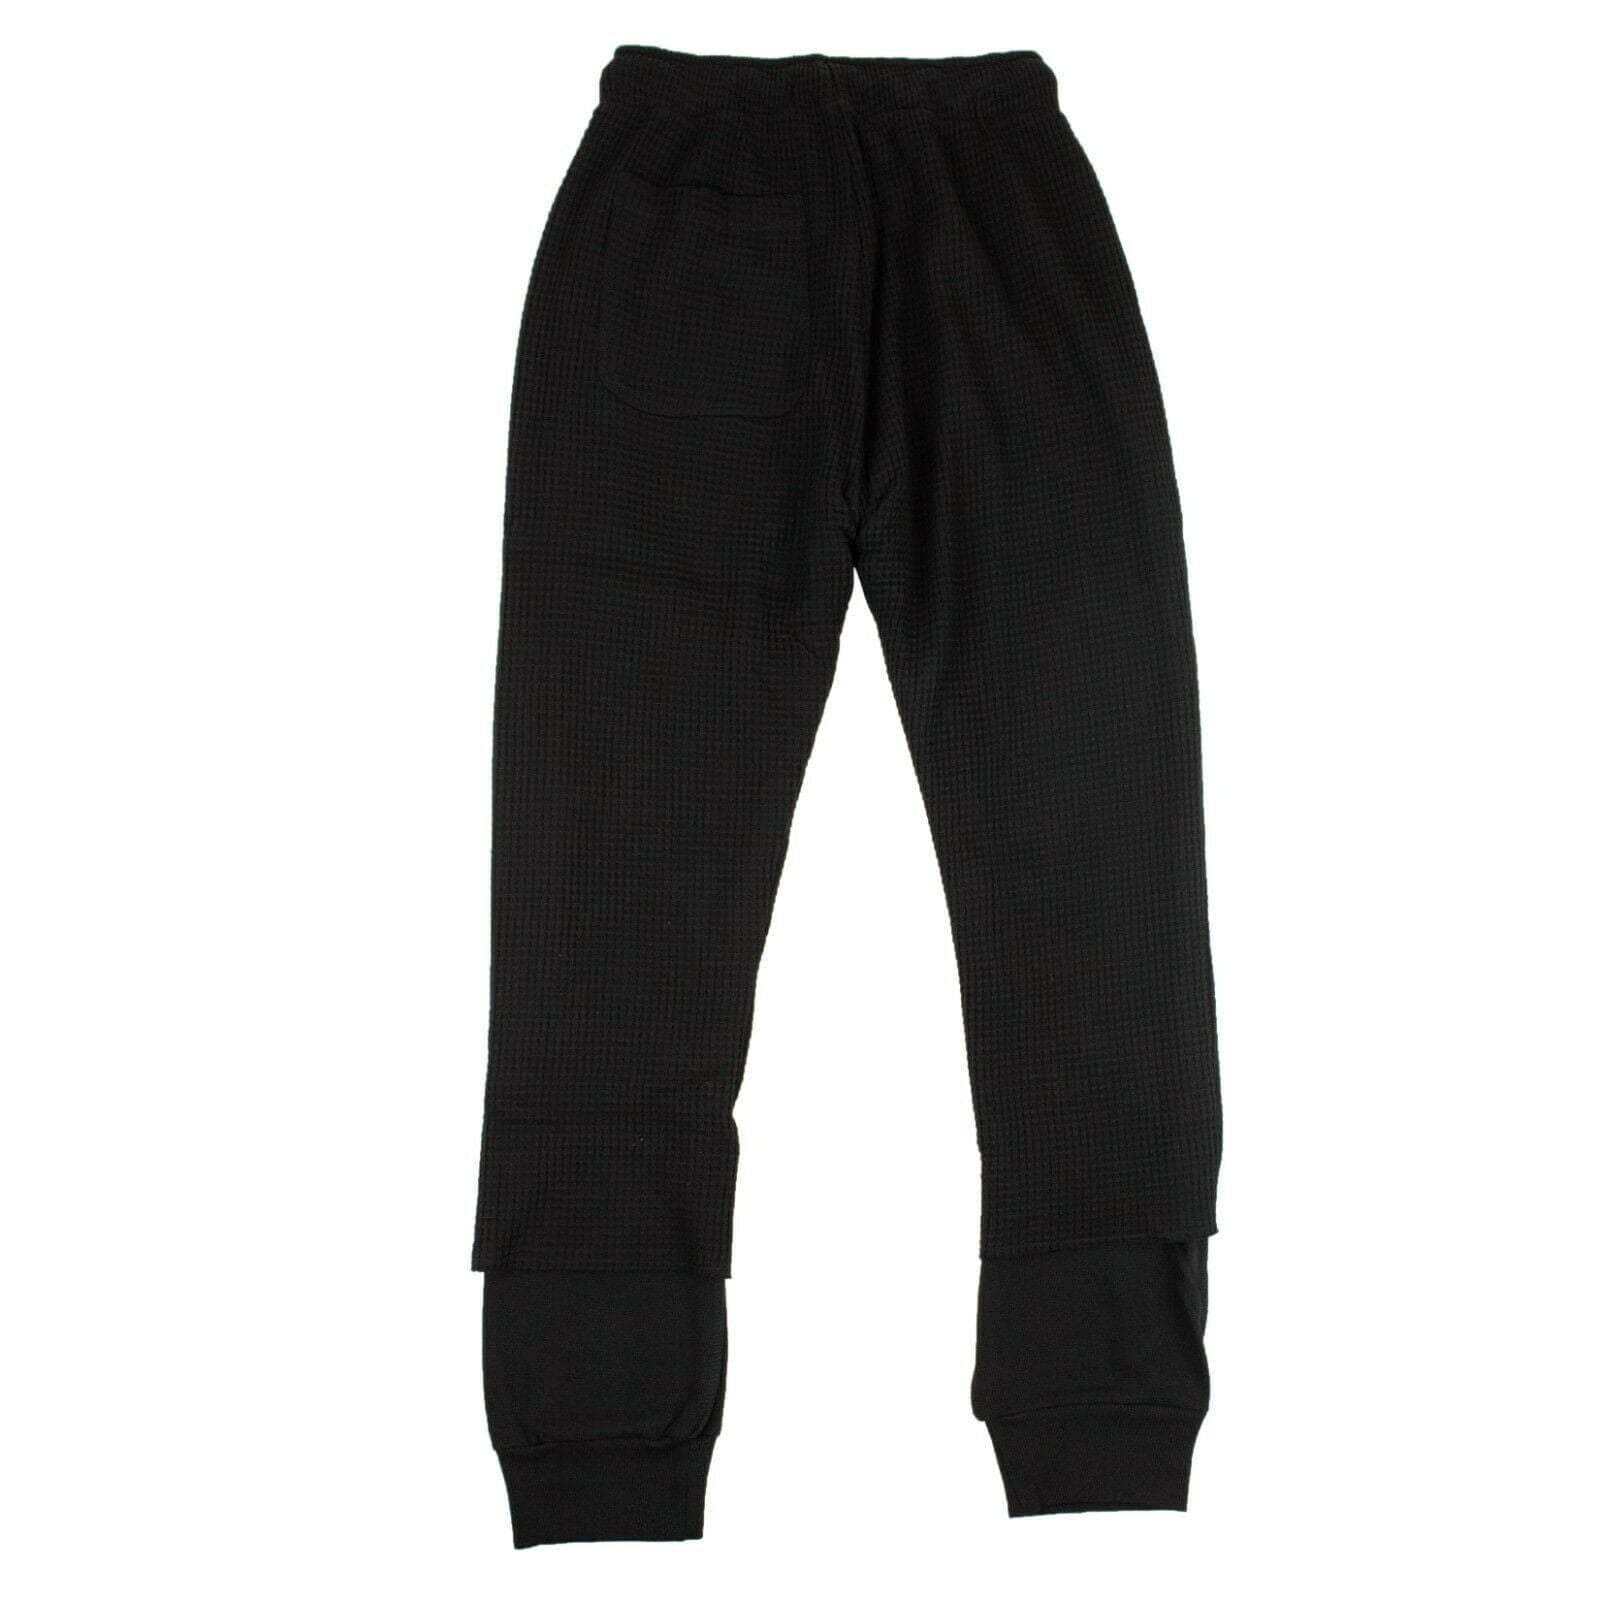 424 ON FAIRFAX 424-on-fairfax, channelenable-all, chicmi, couponcollection, gender-mens, main-clothing, mens-joggers-sweatpants, size-xs, under-250 XS Black Waffle Ribbed Sweatpants 87AB-424-1062/XS 87AB-424-1062/XS